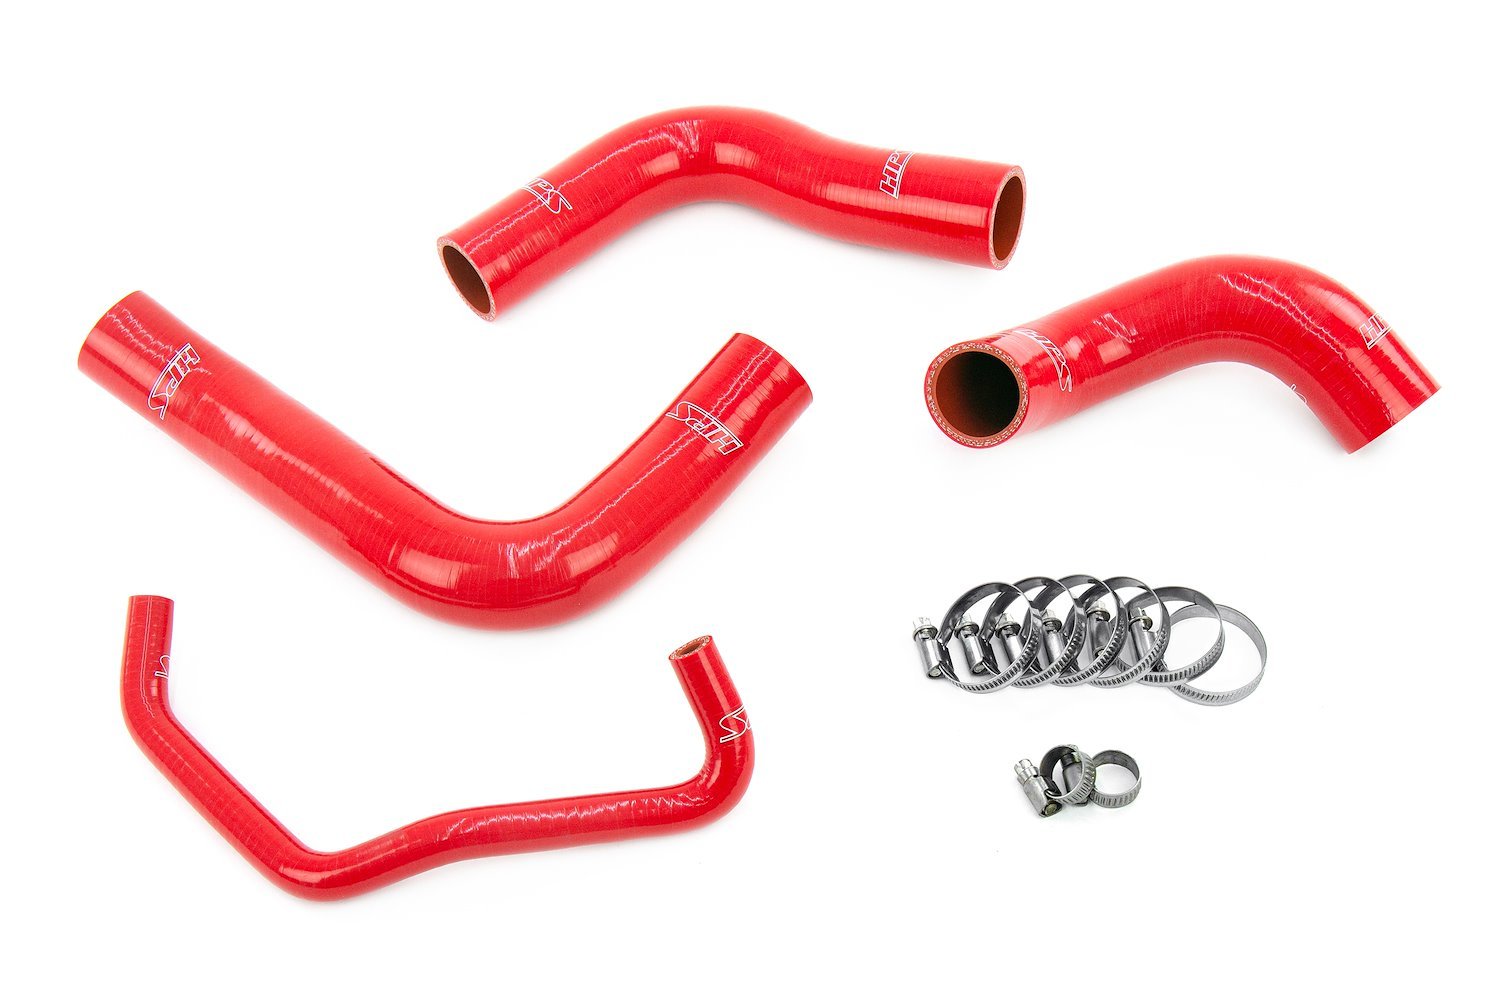 57-1842-RED Radiator Hose Kit, 3-Ply Reinforced Silicone, Replaces Rubber Radiator & Reserve Tank Coolant Hoses